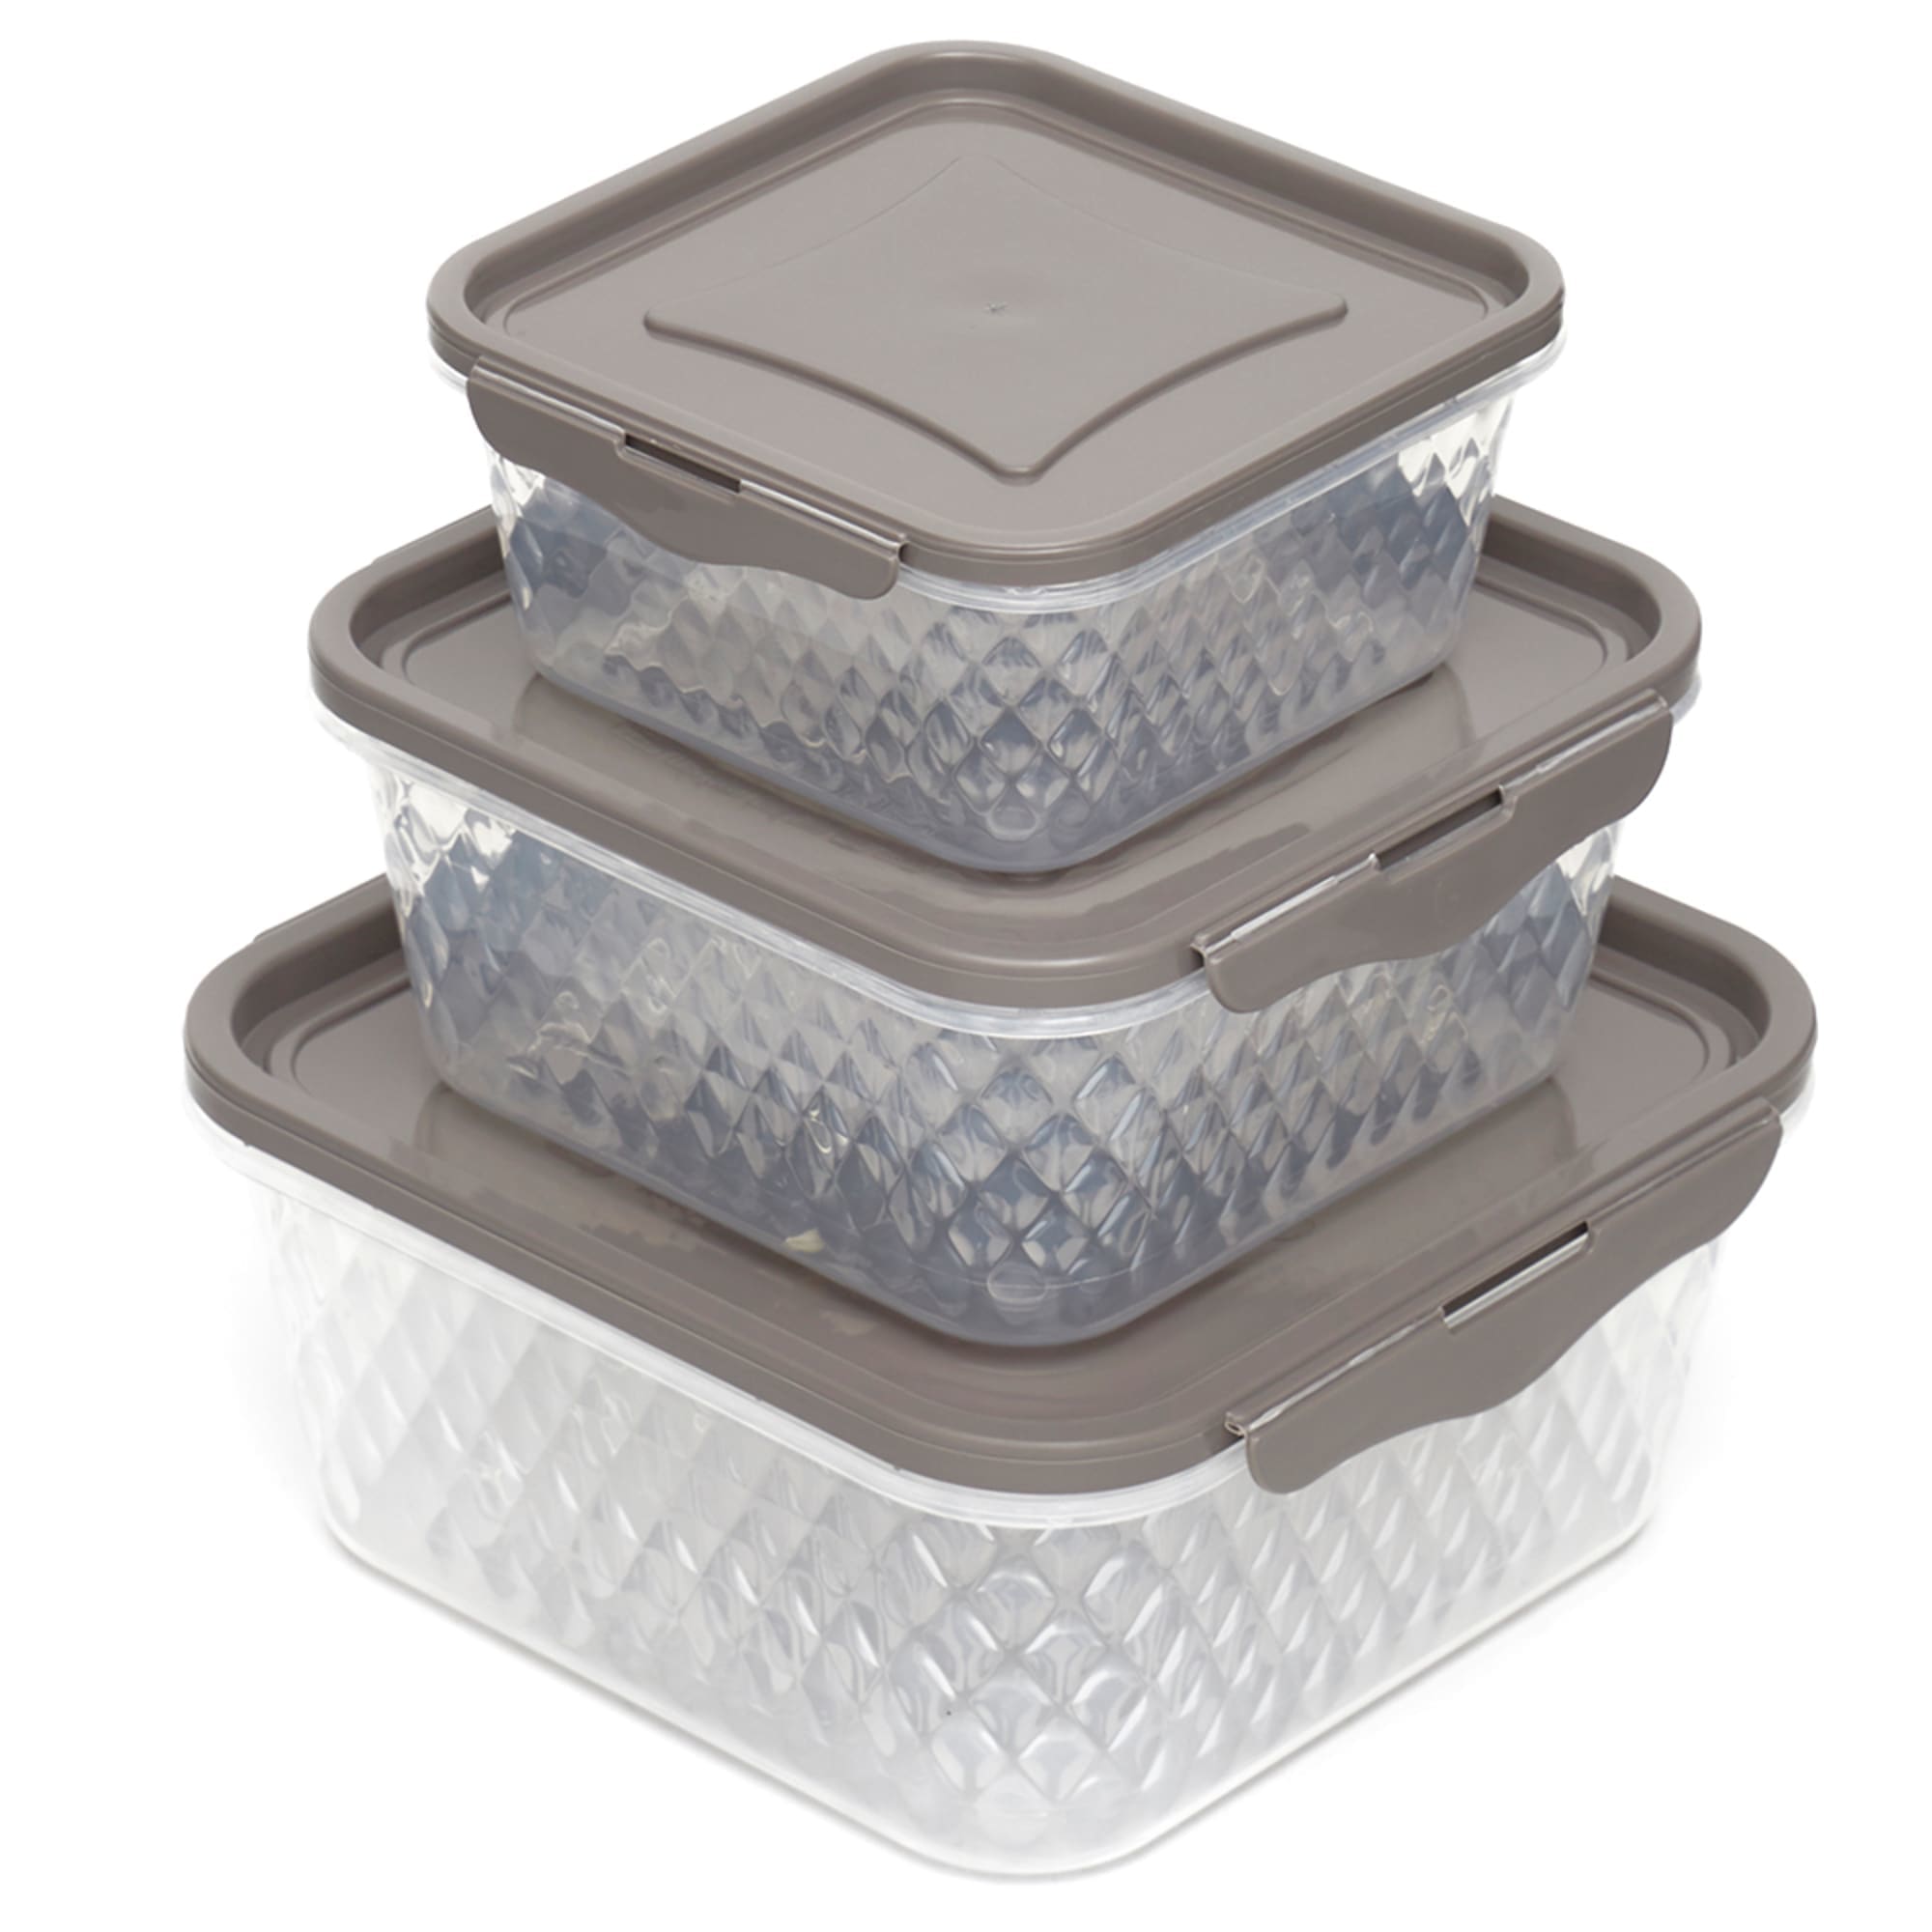 Home Basics Crystal 3 Piece Square Food Storage Containers with